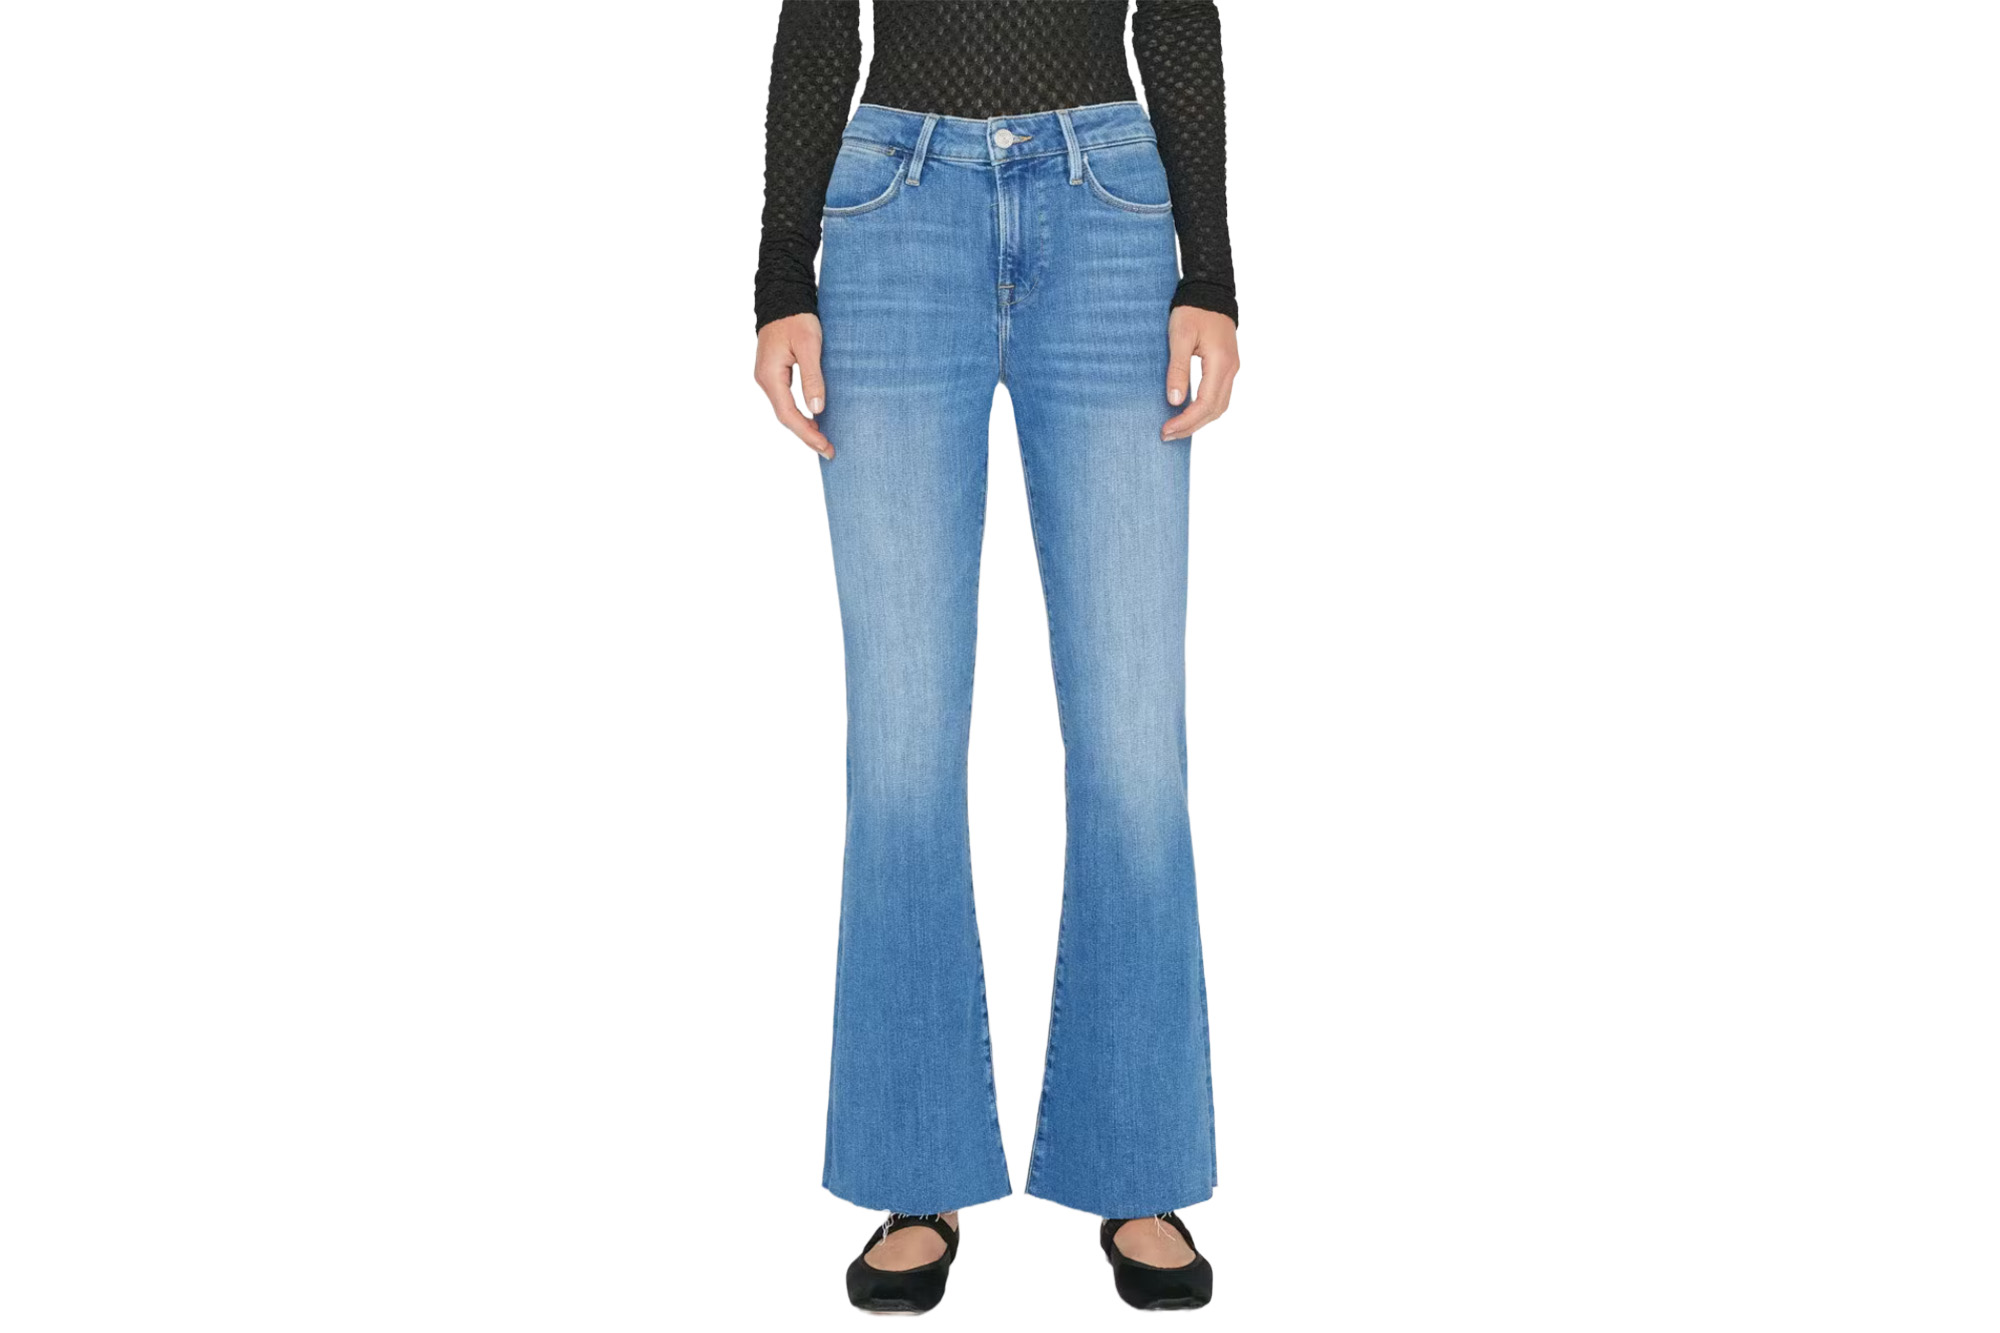 Frayed Frame jeans in a blue wash